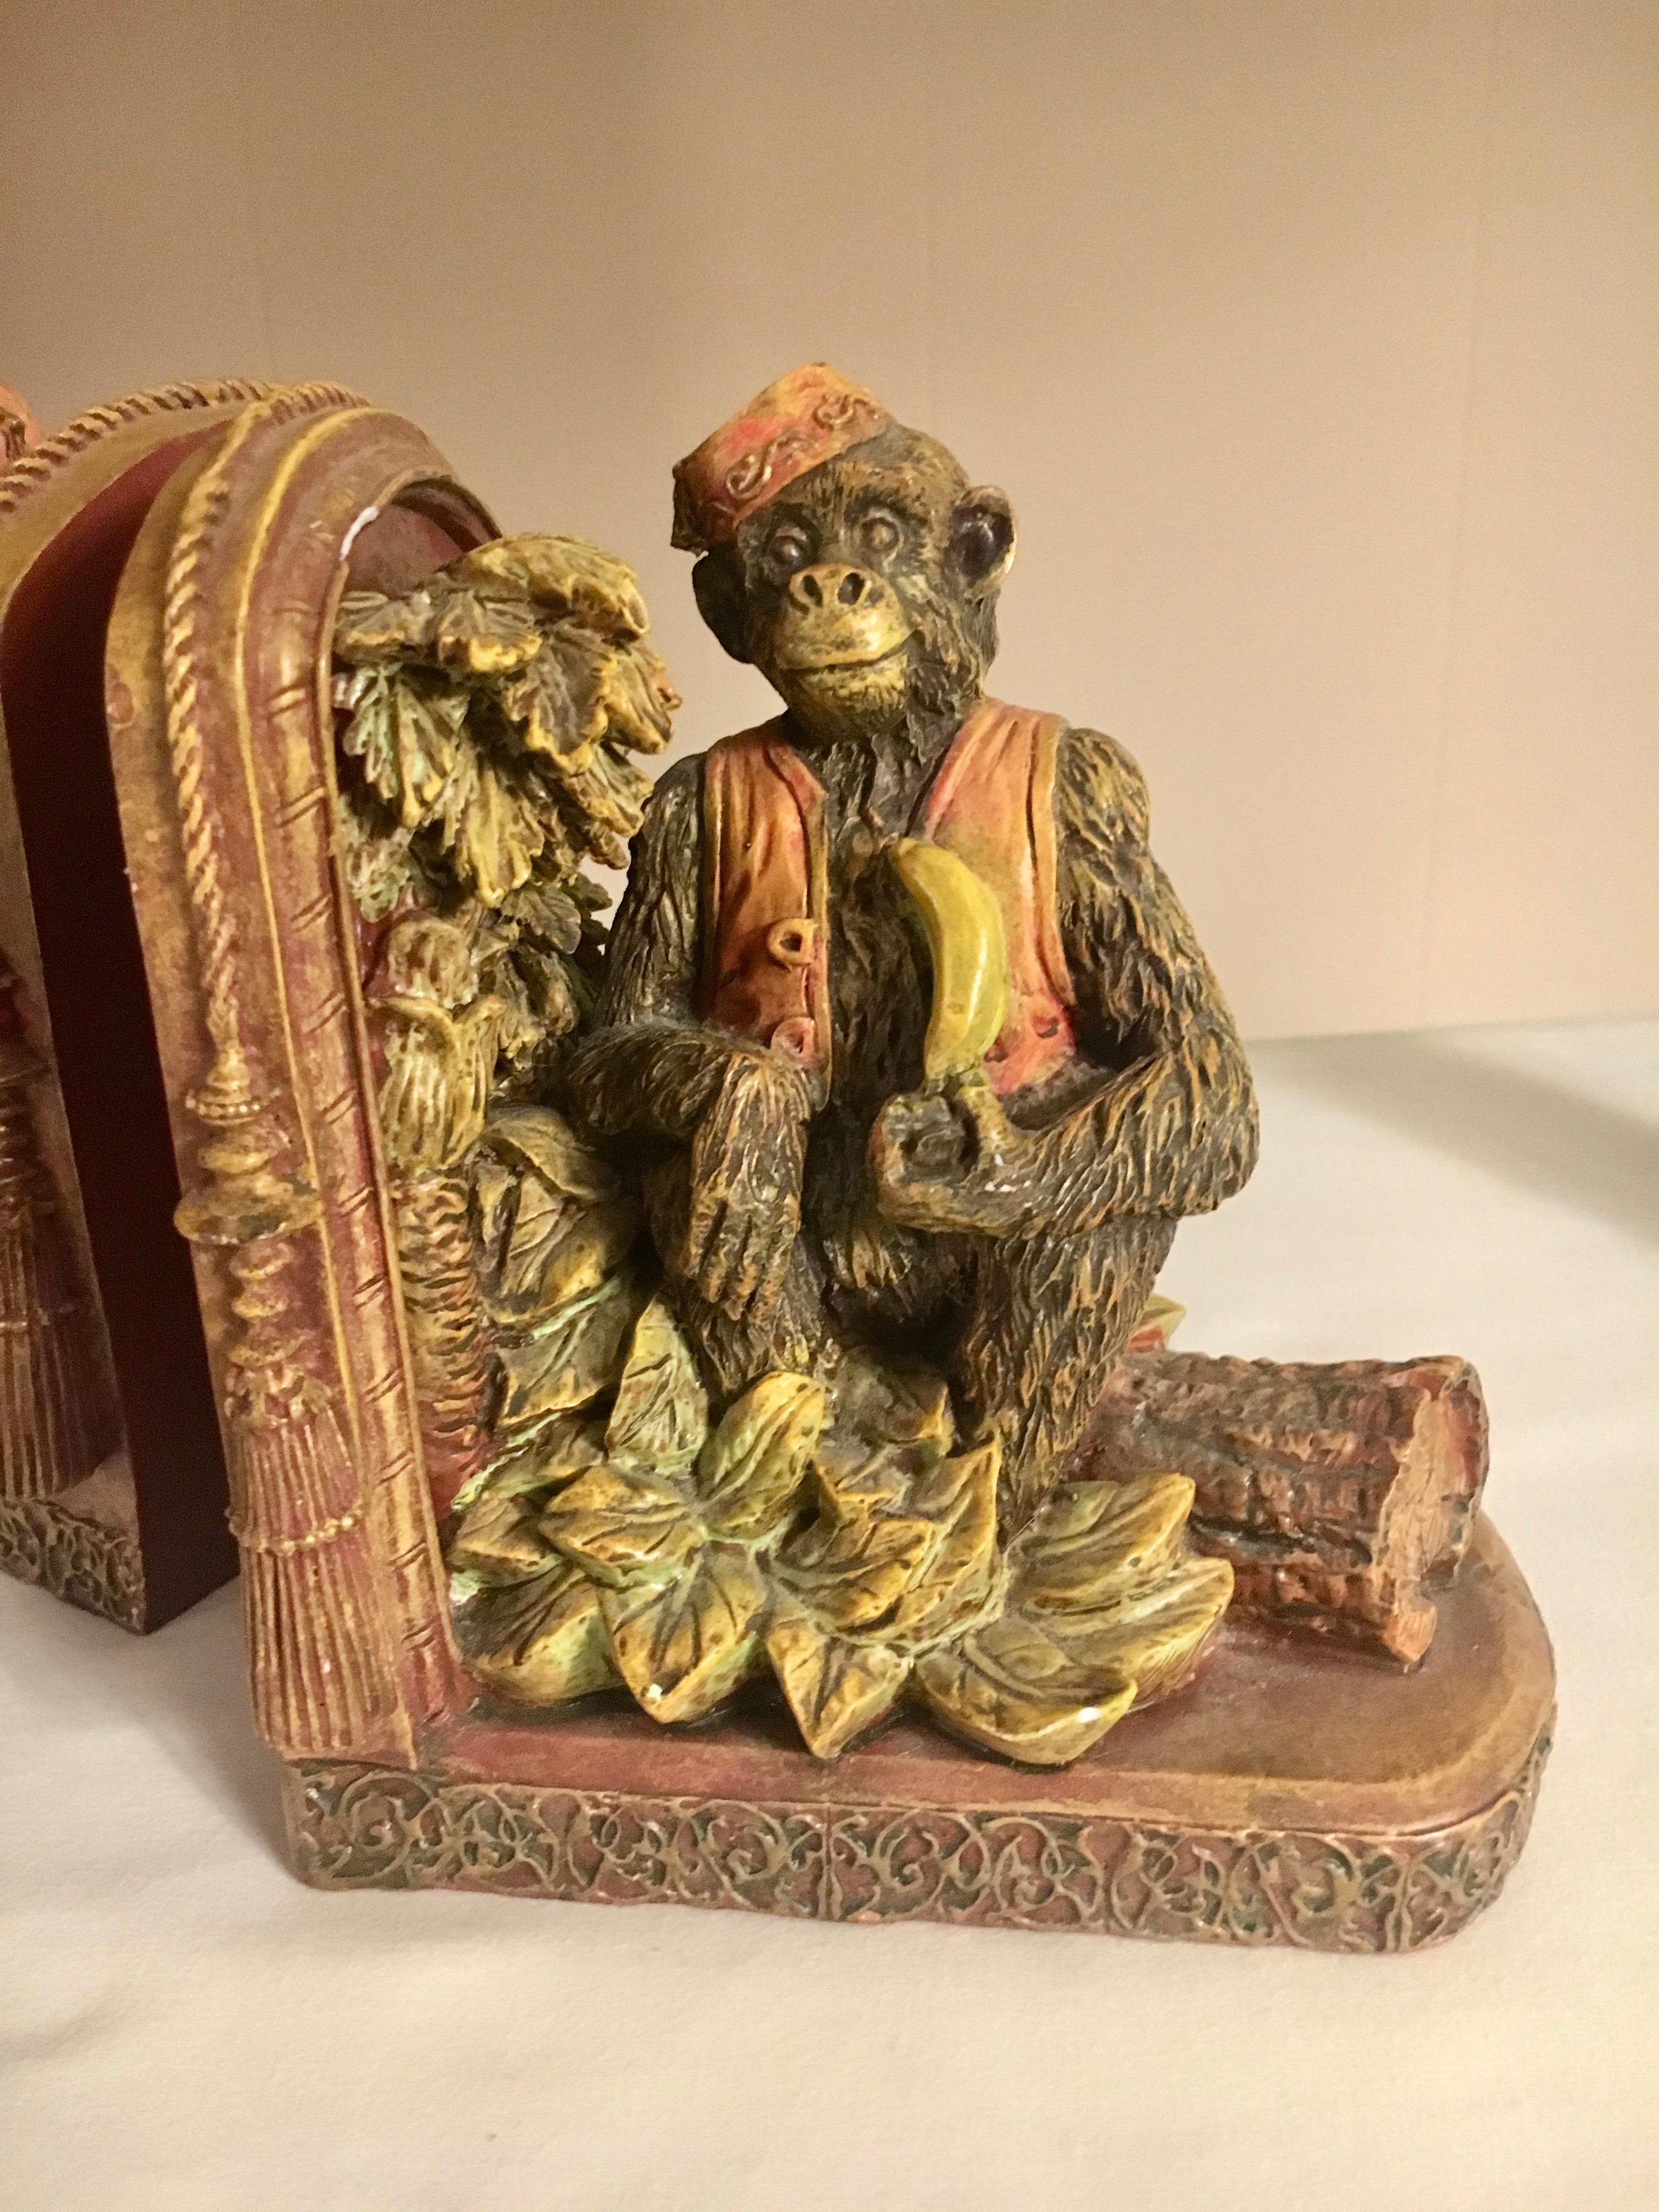 20th Century Pair of Bookends with Monkeys